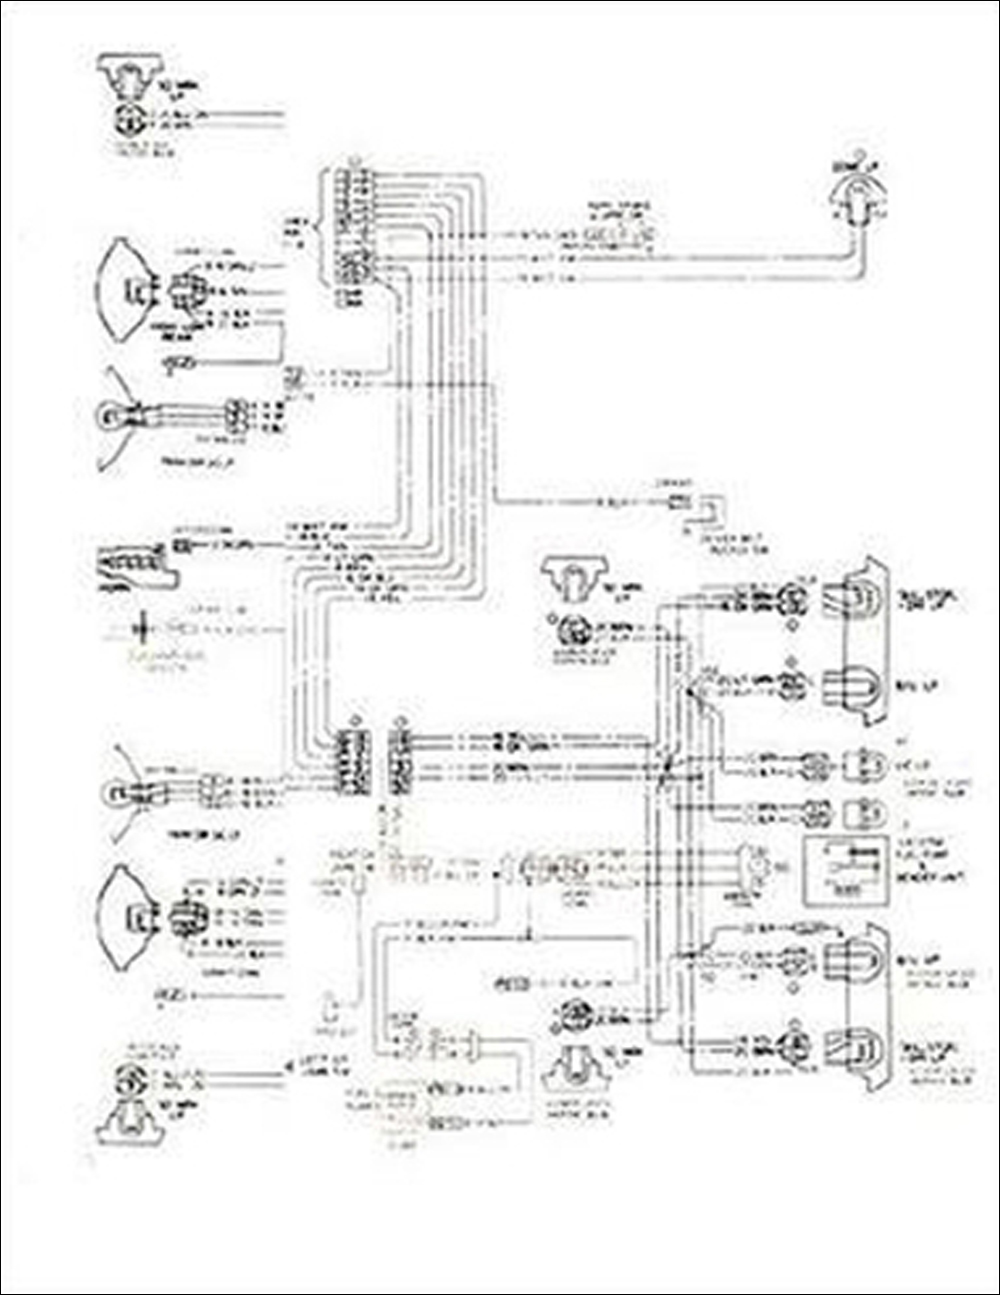 1976 Chevy Foldout Wiring Diagrams Original - Select your model from the list